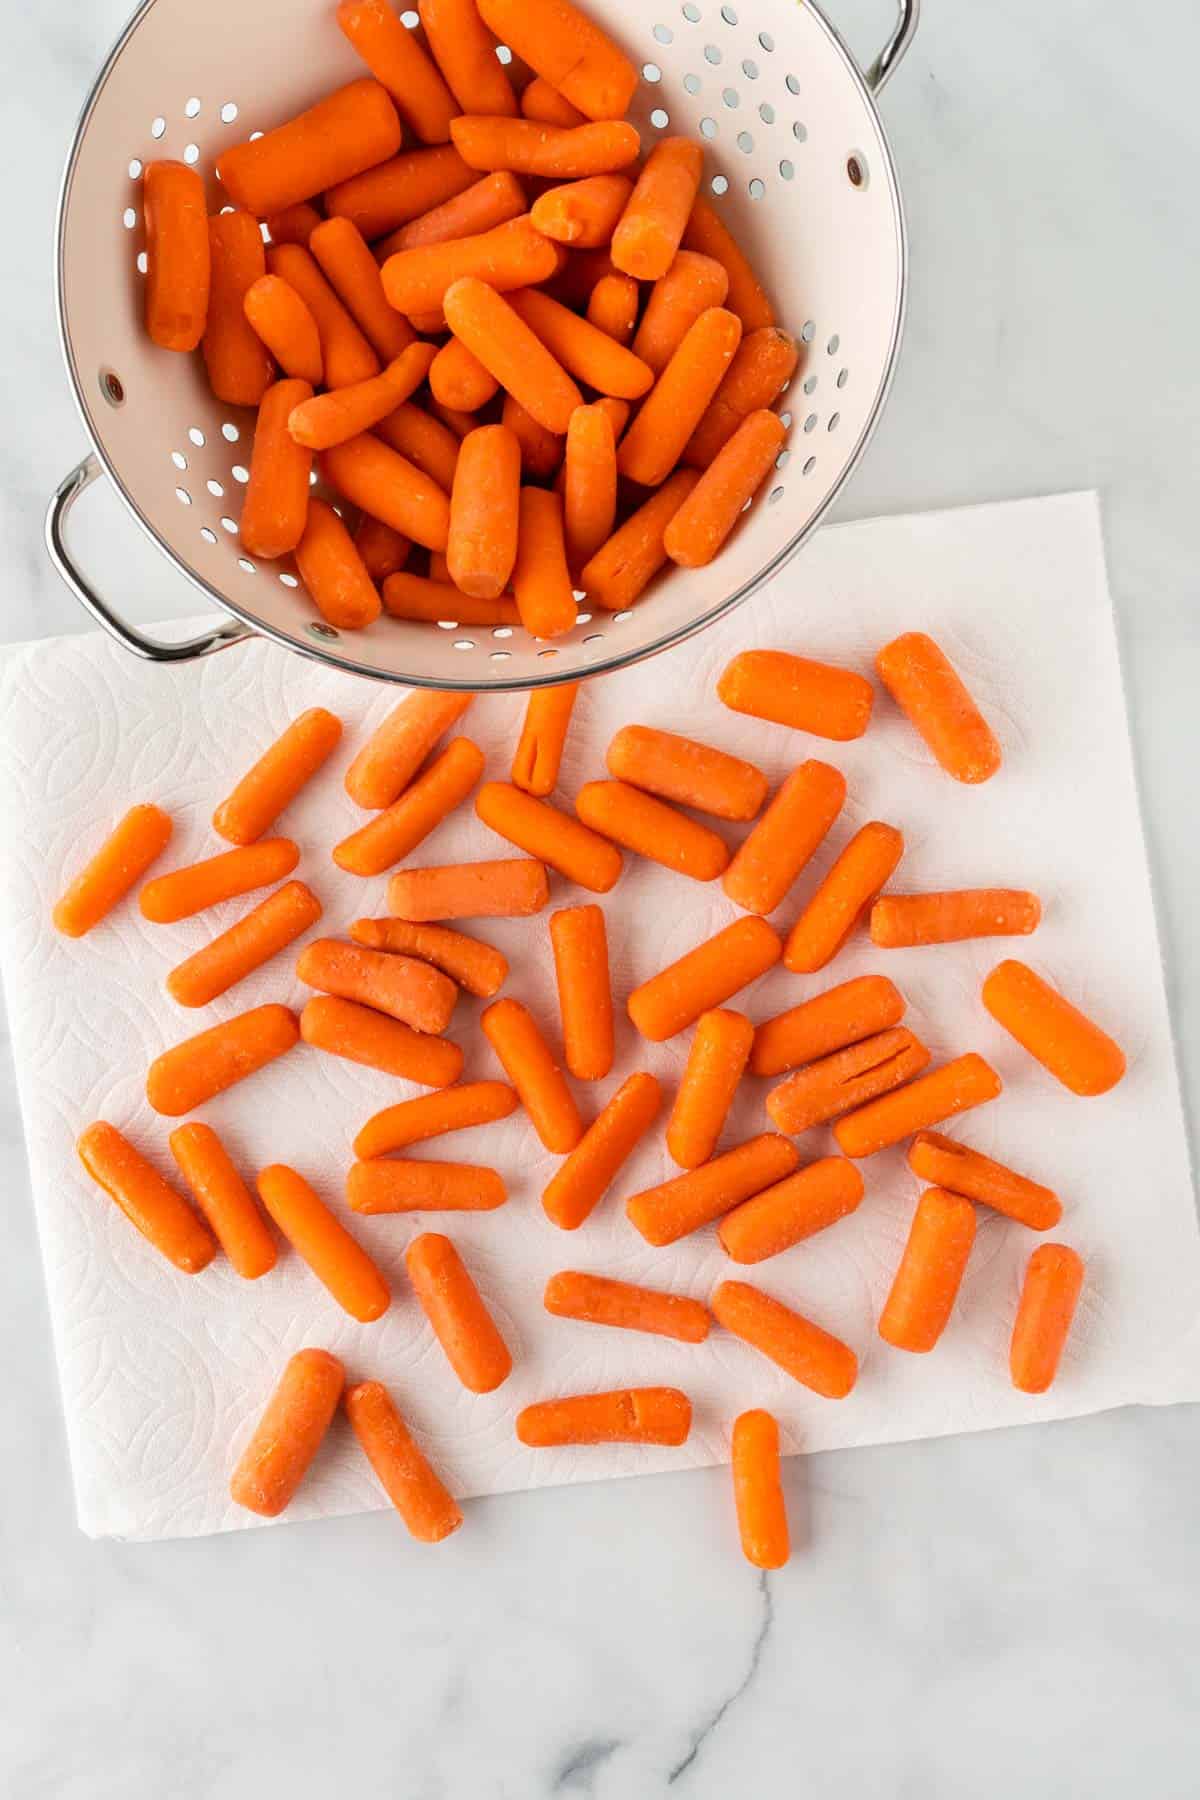 drying baby carrots on a paper towel